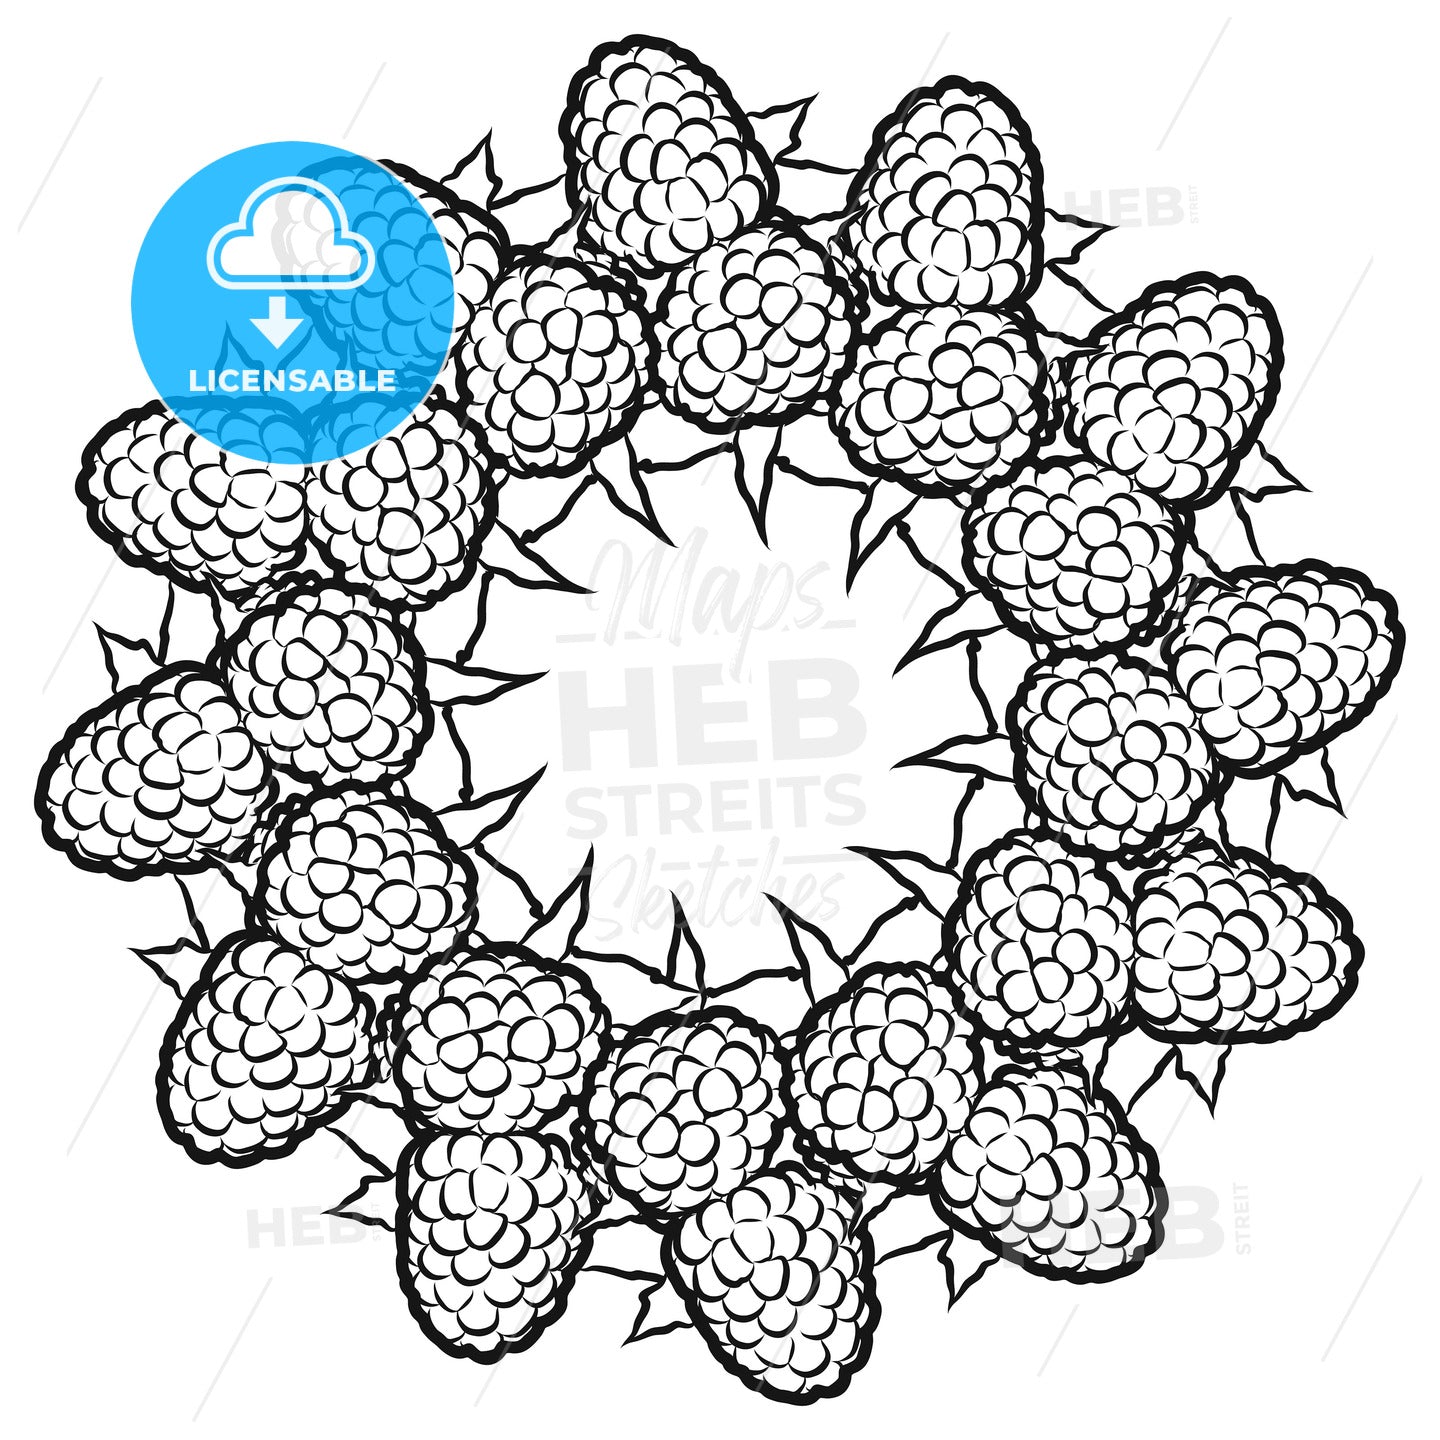 Outline sketch of raspberries arranged in a circle – instant download